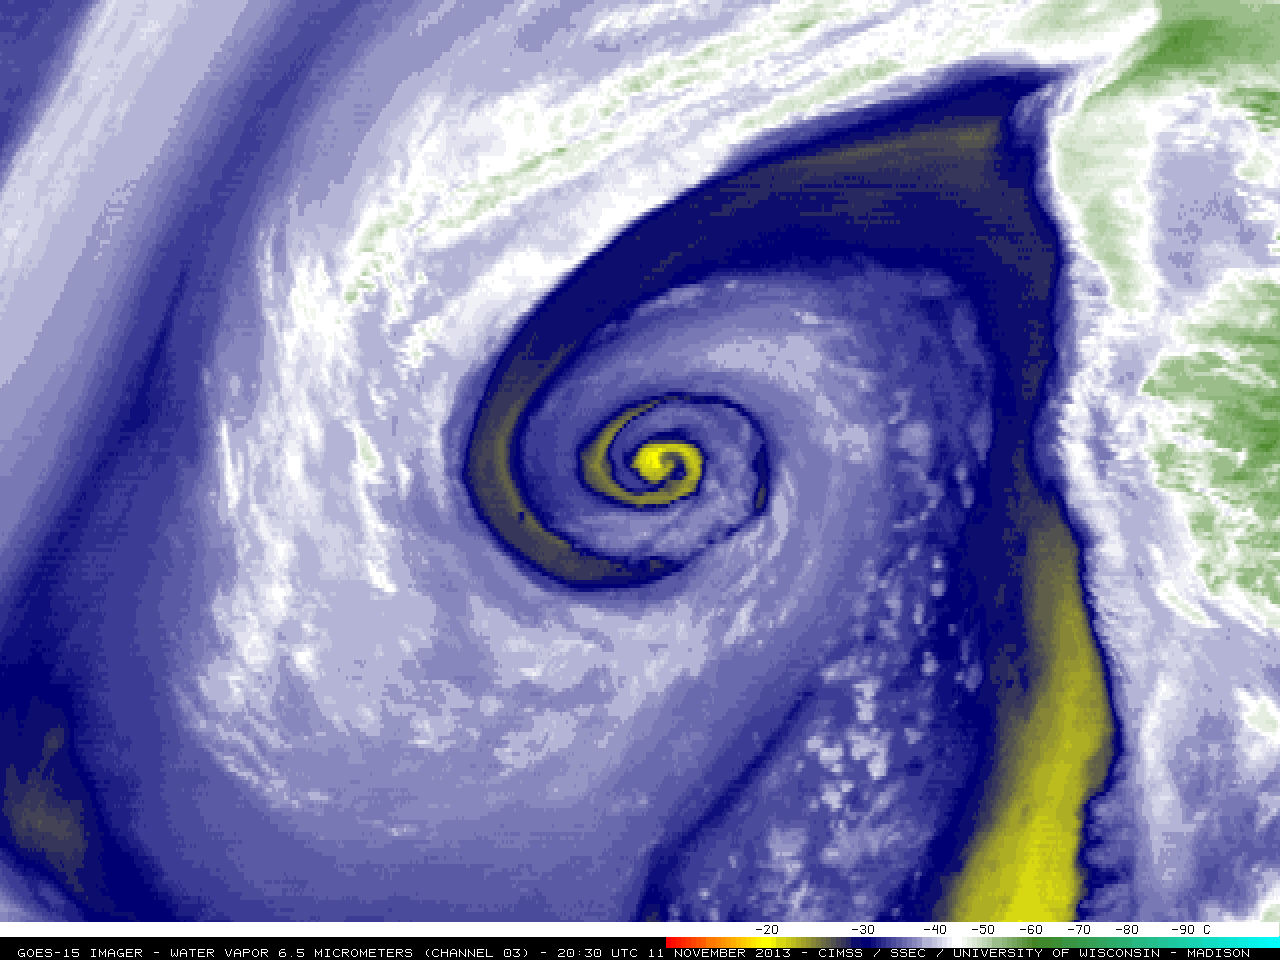 GOES-15 6.5 Âµm water vapor channel images (click to play animation)